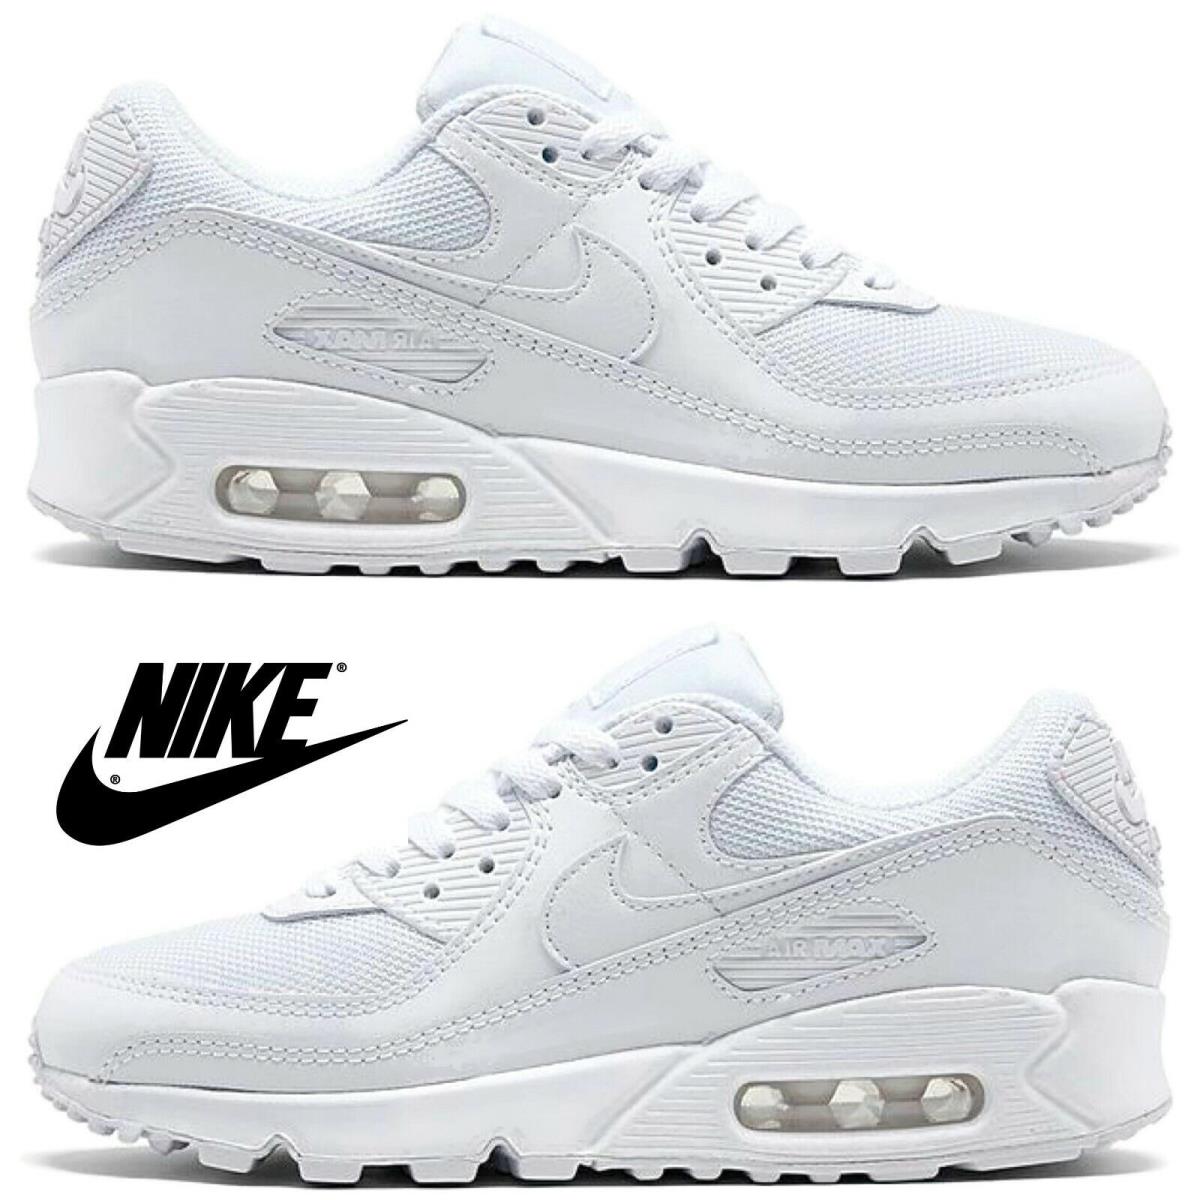 Nike Air Max 90 Women s Sneakers Casual Shoes Premium Running Sport Gym White